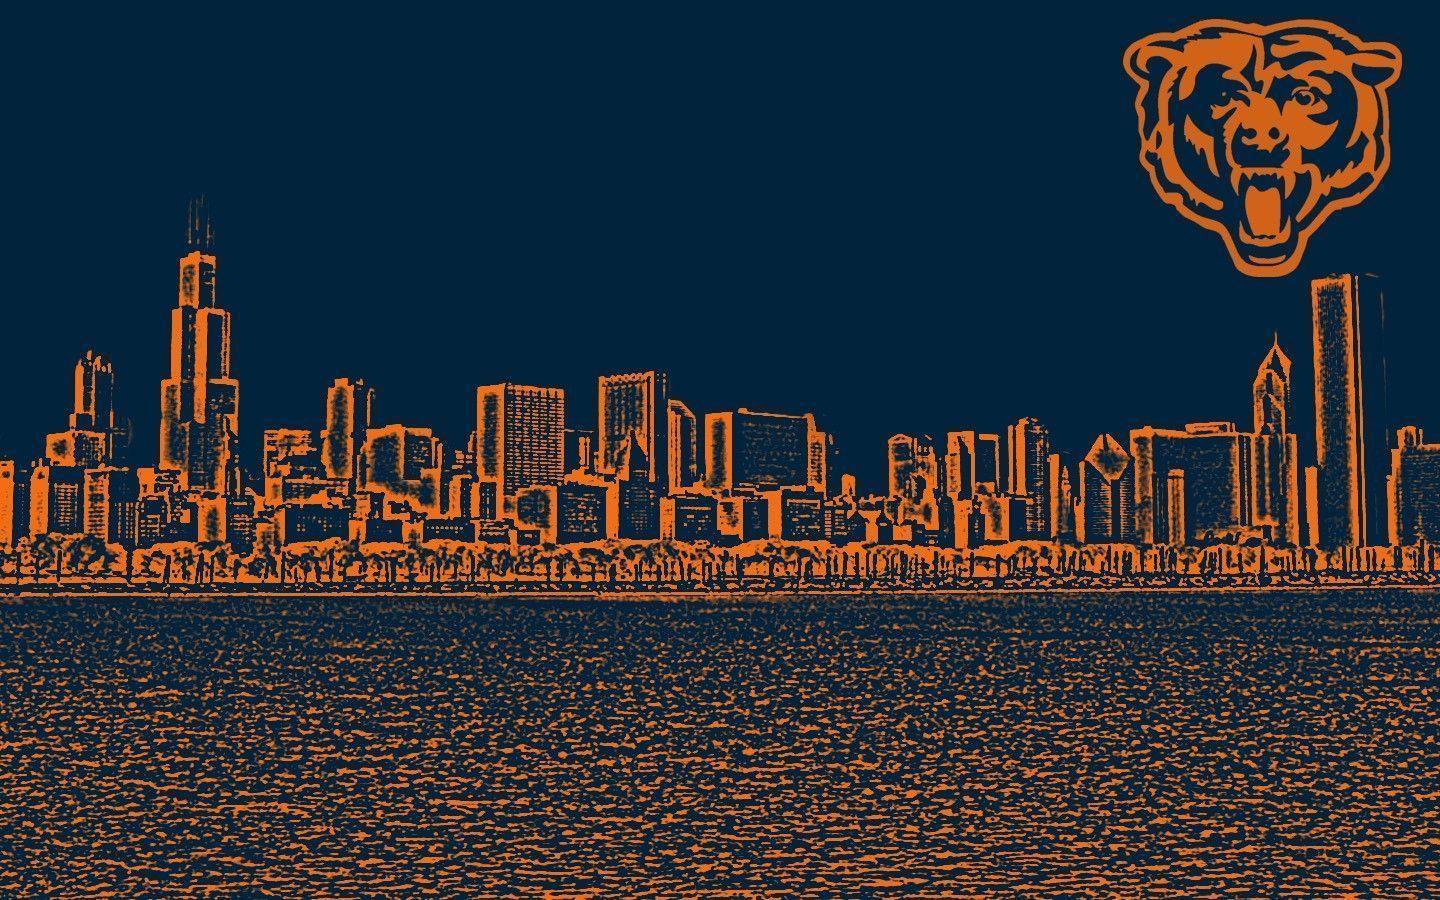 Chicago Bears Wallpapers  Top 35 Best Chicago Bears Backgrounds Download